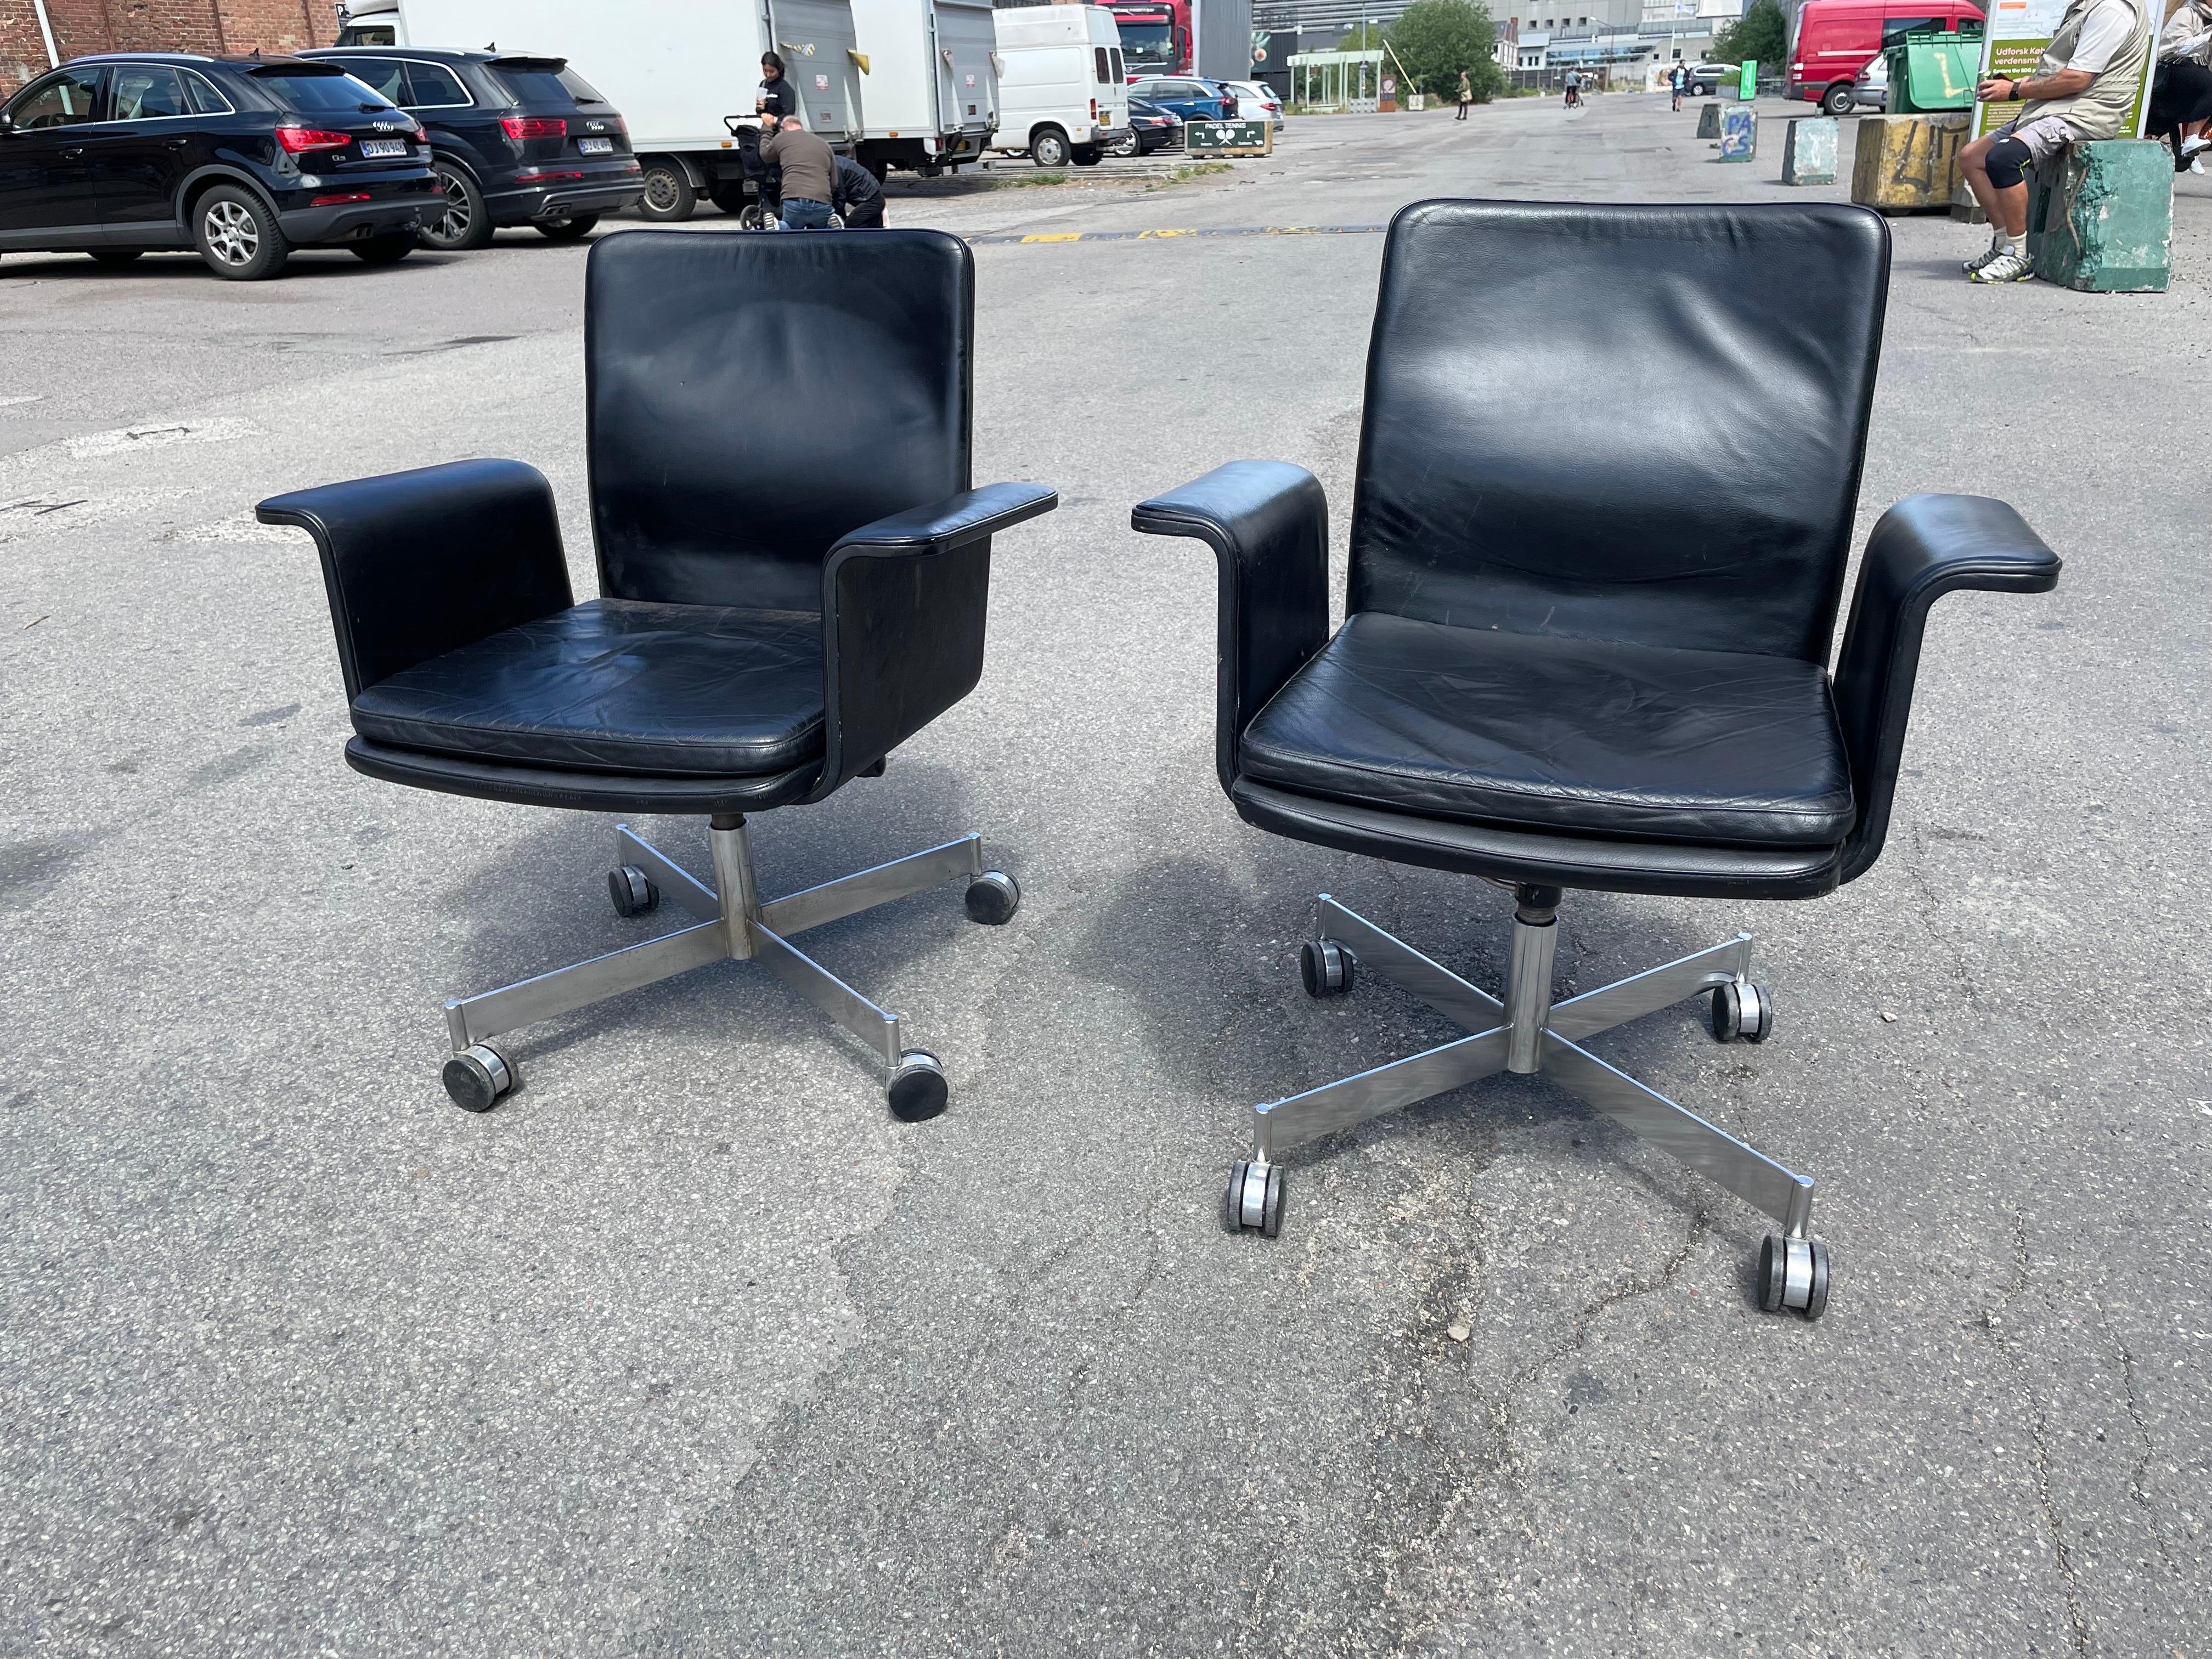 Two Swivel chairs in patinated leather on a swivel base. Designed by the renowned Jørgen Rasmussen for Kevi A/S in the 1960s and proudly made in Denmark, these chairs are in a good original condition.